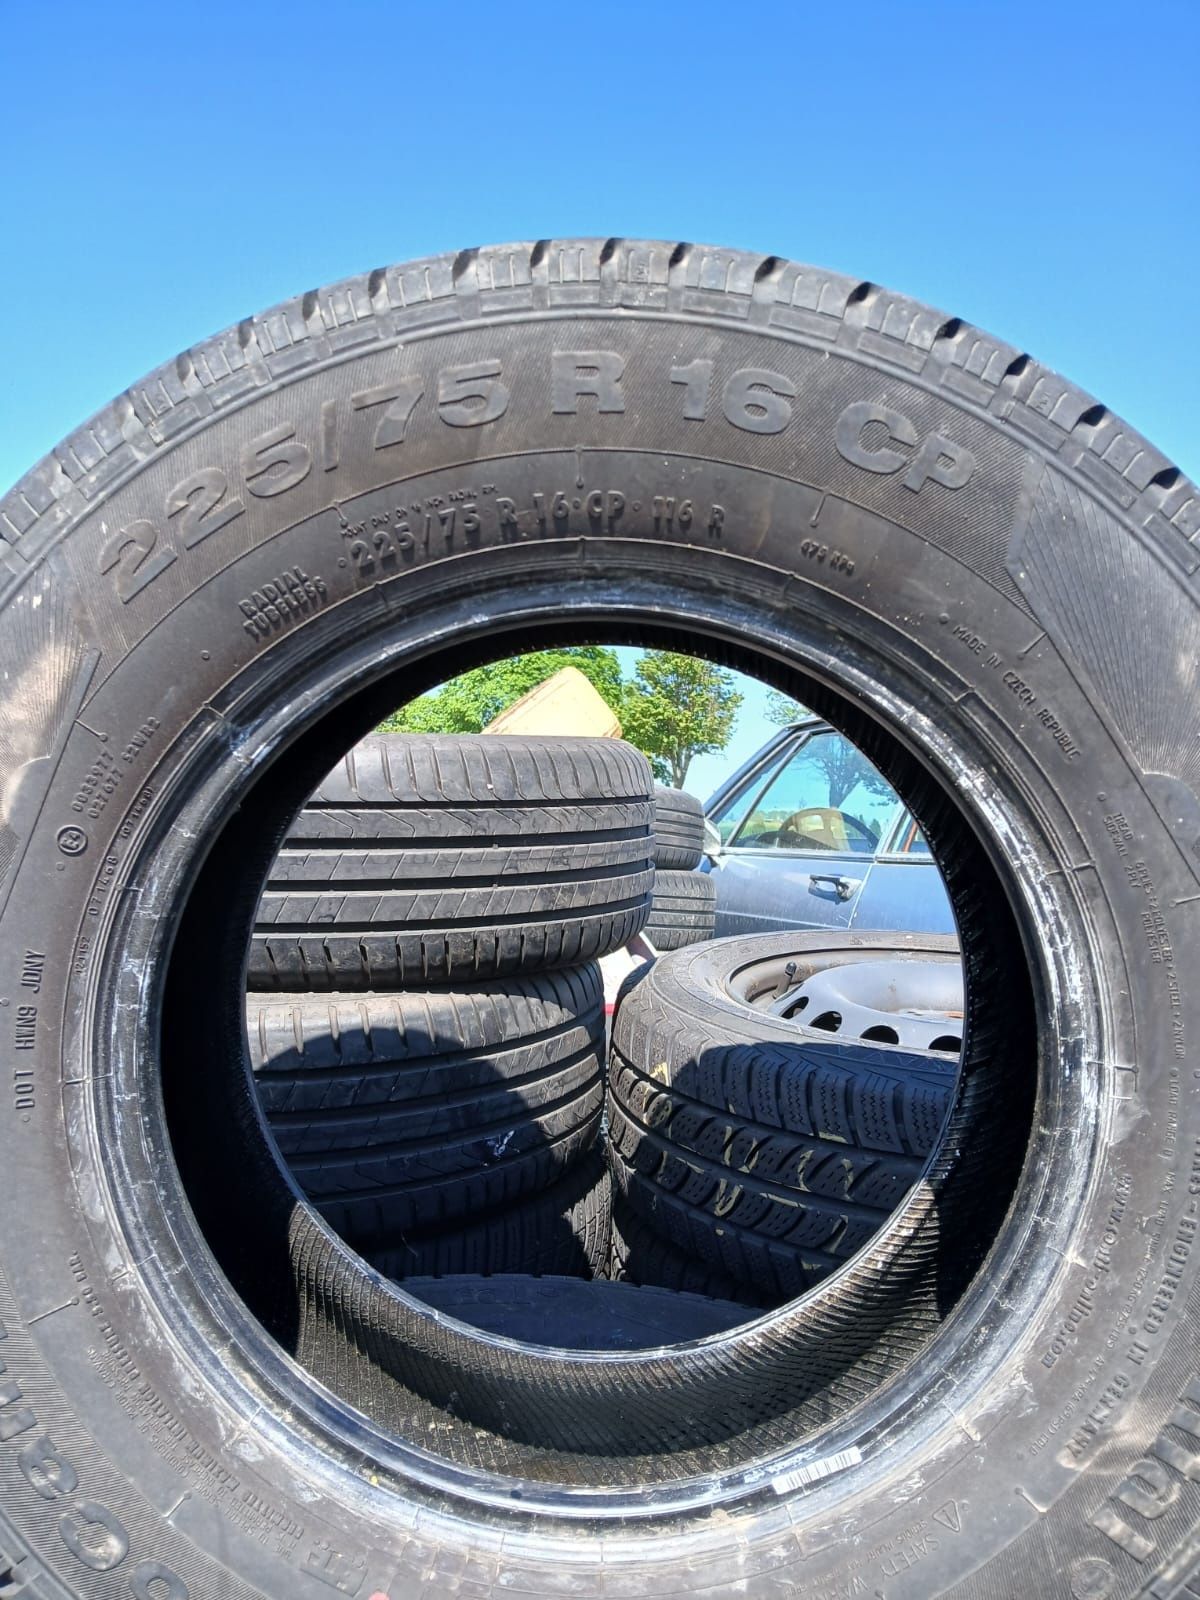 Opony Continental 225/75 R16 CP